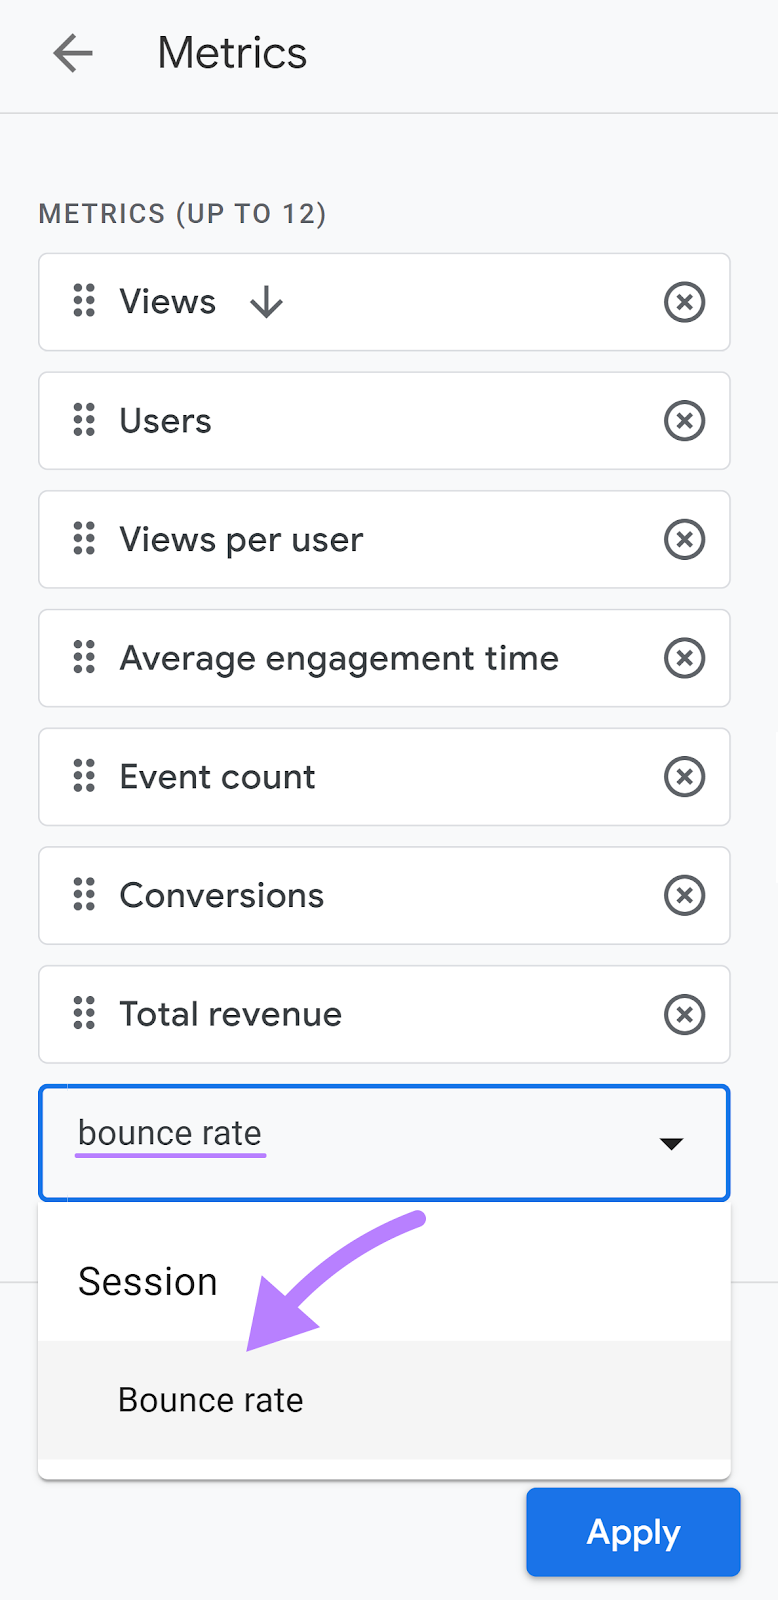 "bounce rate" added under "Add metric" field